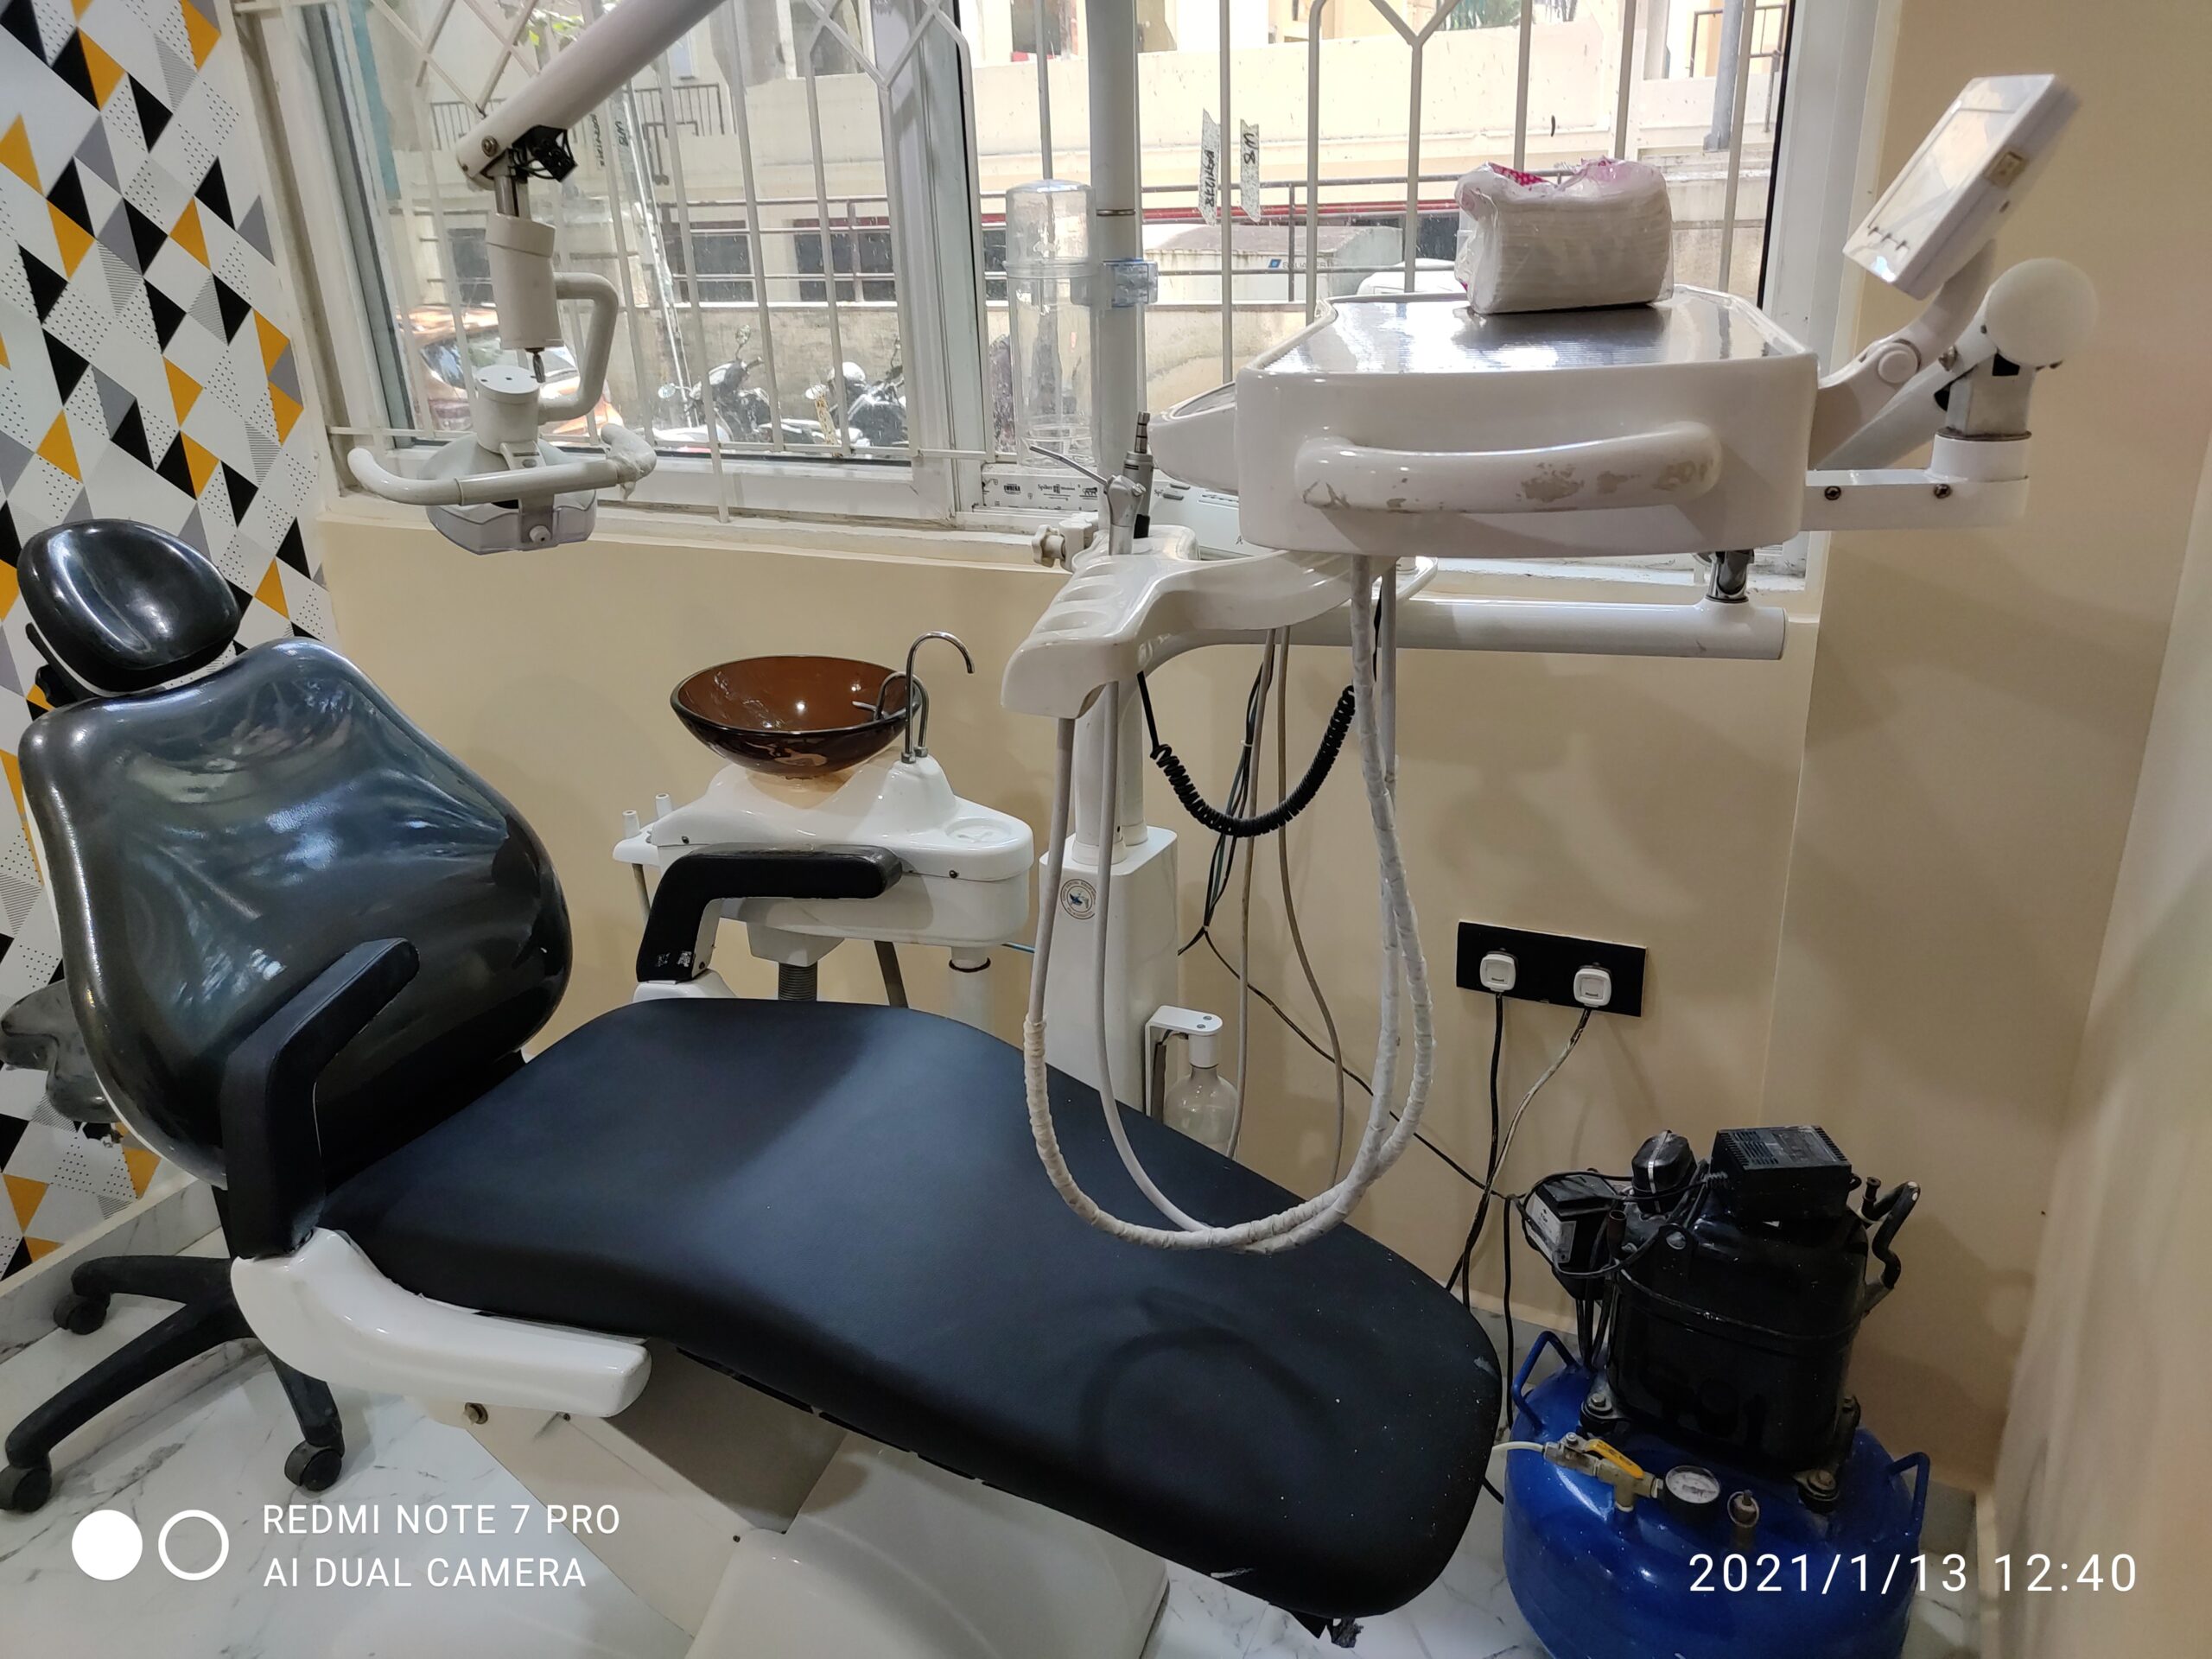 RCT IN BANGALORE. ROOT CANAL TREATMENT COST IN BANGALORE. ROOT CANAL COST IN BANGALORE. ROOT CANAL TREATMENT IN BANGALORE. COST OF ROOT CANAL TREATMENT IN BANGALORE